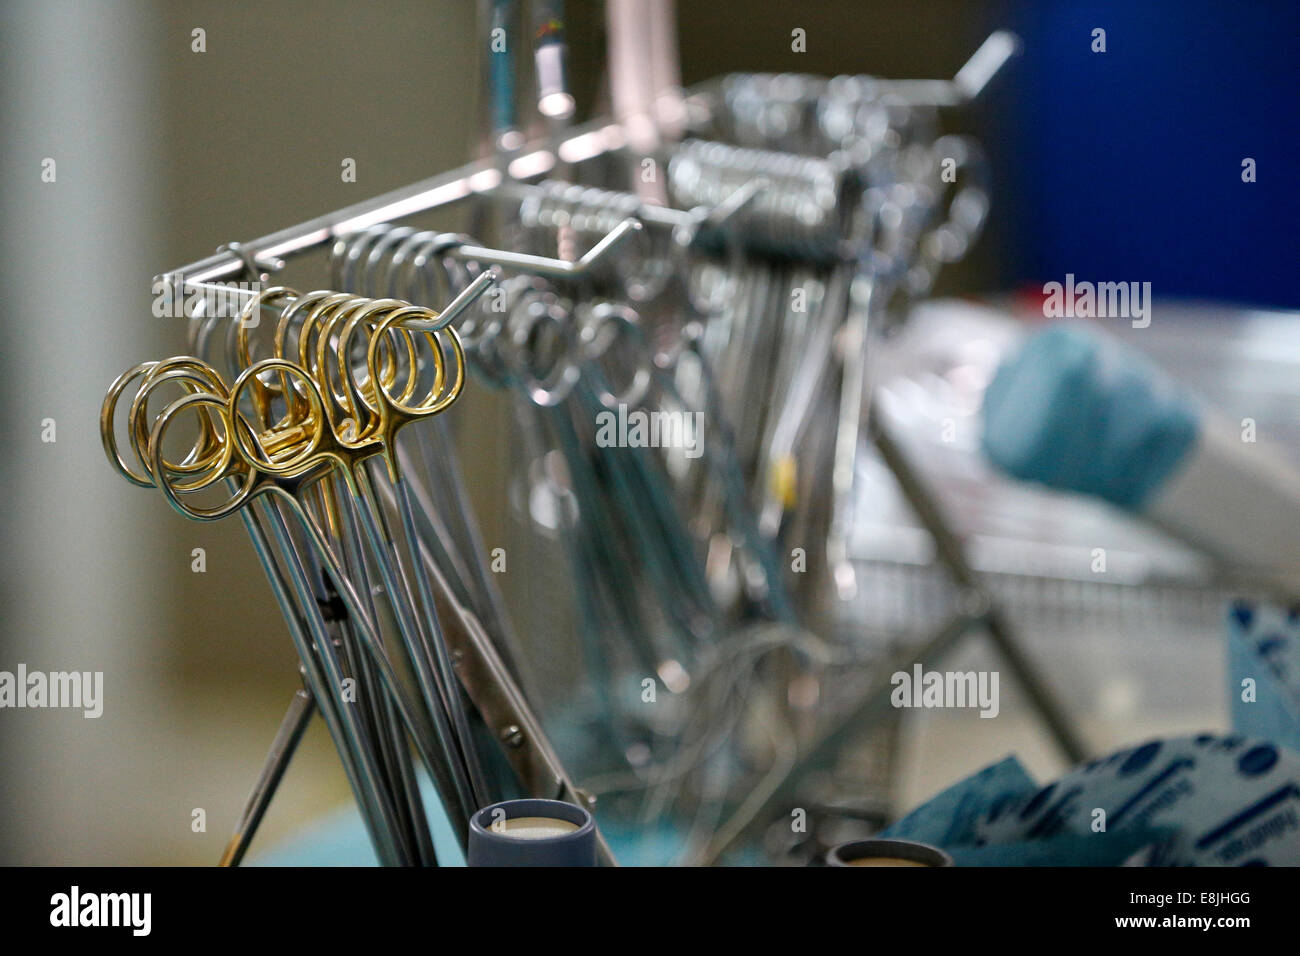 Surgical instruments. Operating theatre. Fann hospital Stock Photo